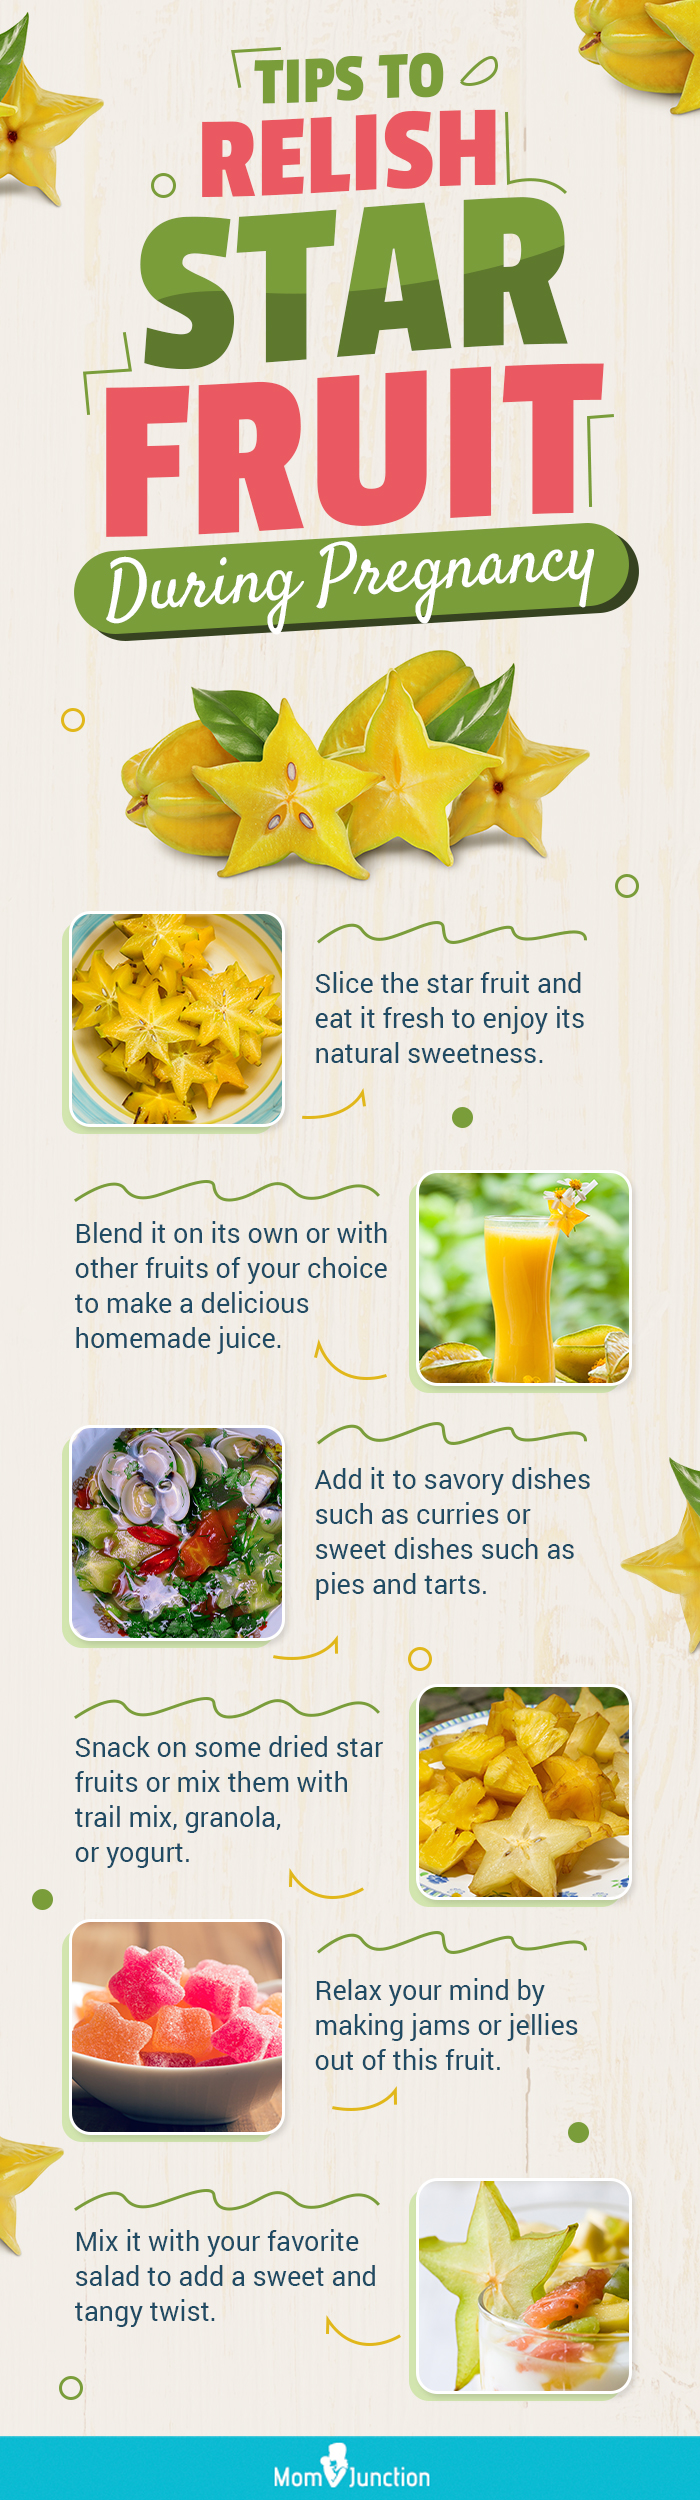 tips to relish star fruit during pregnancy (infographic)